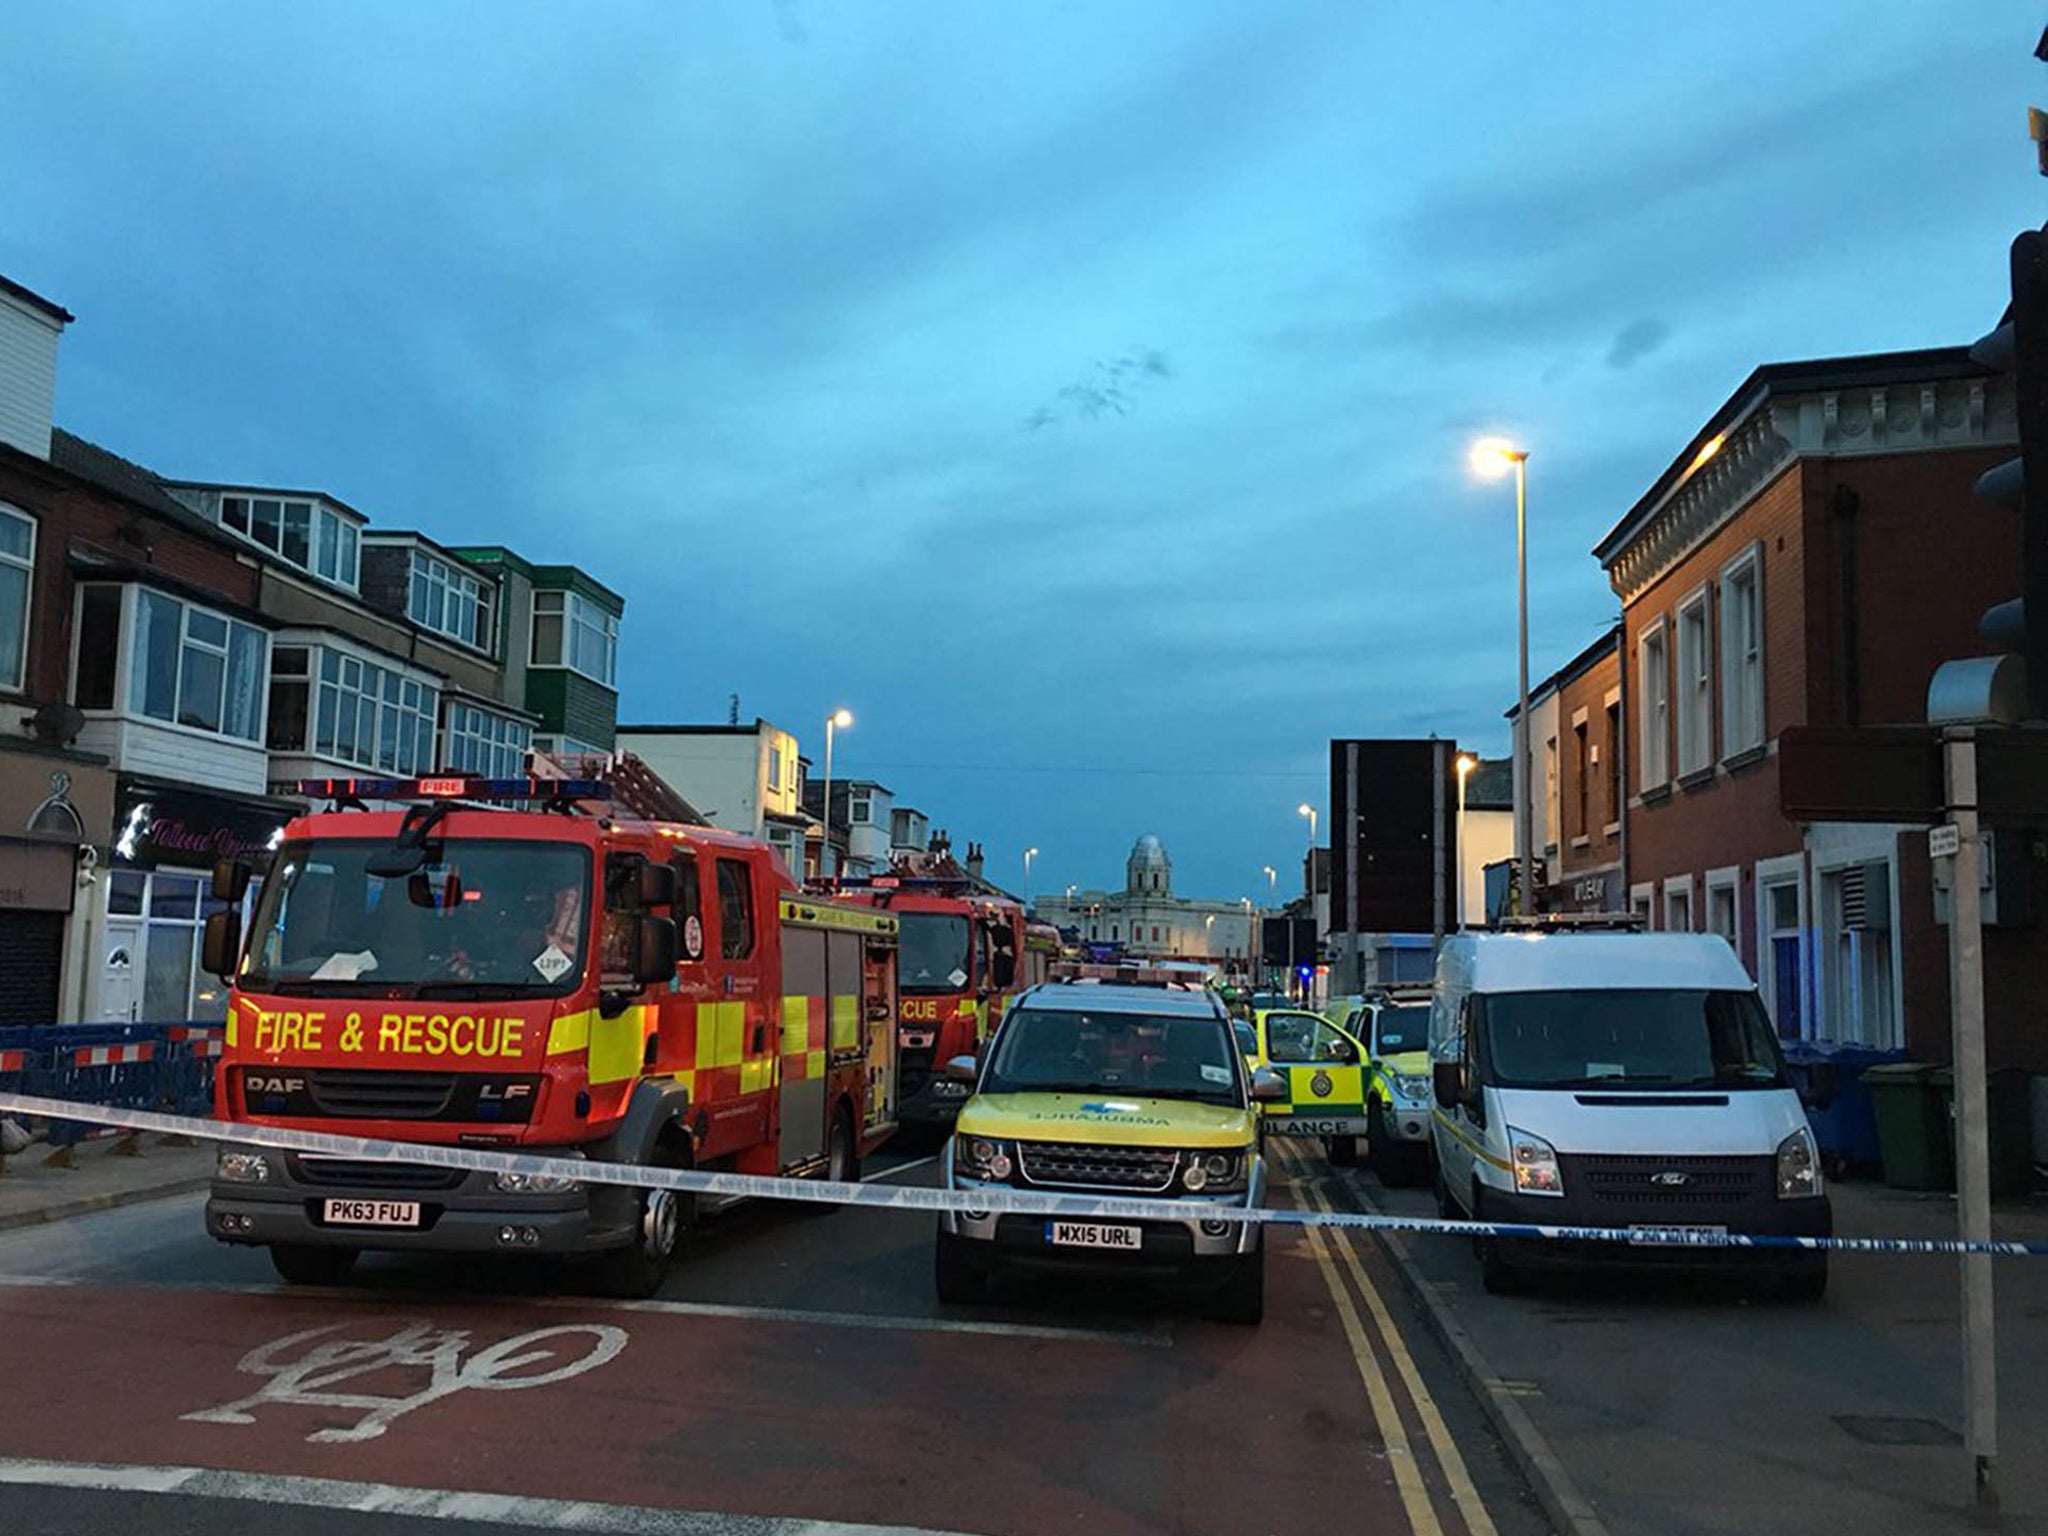 A suspected gas explosion has left several people injured in Blackpool